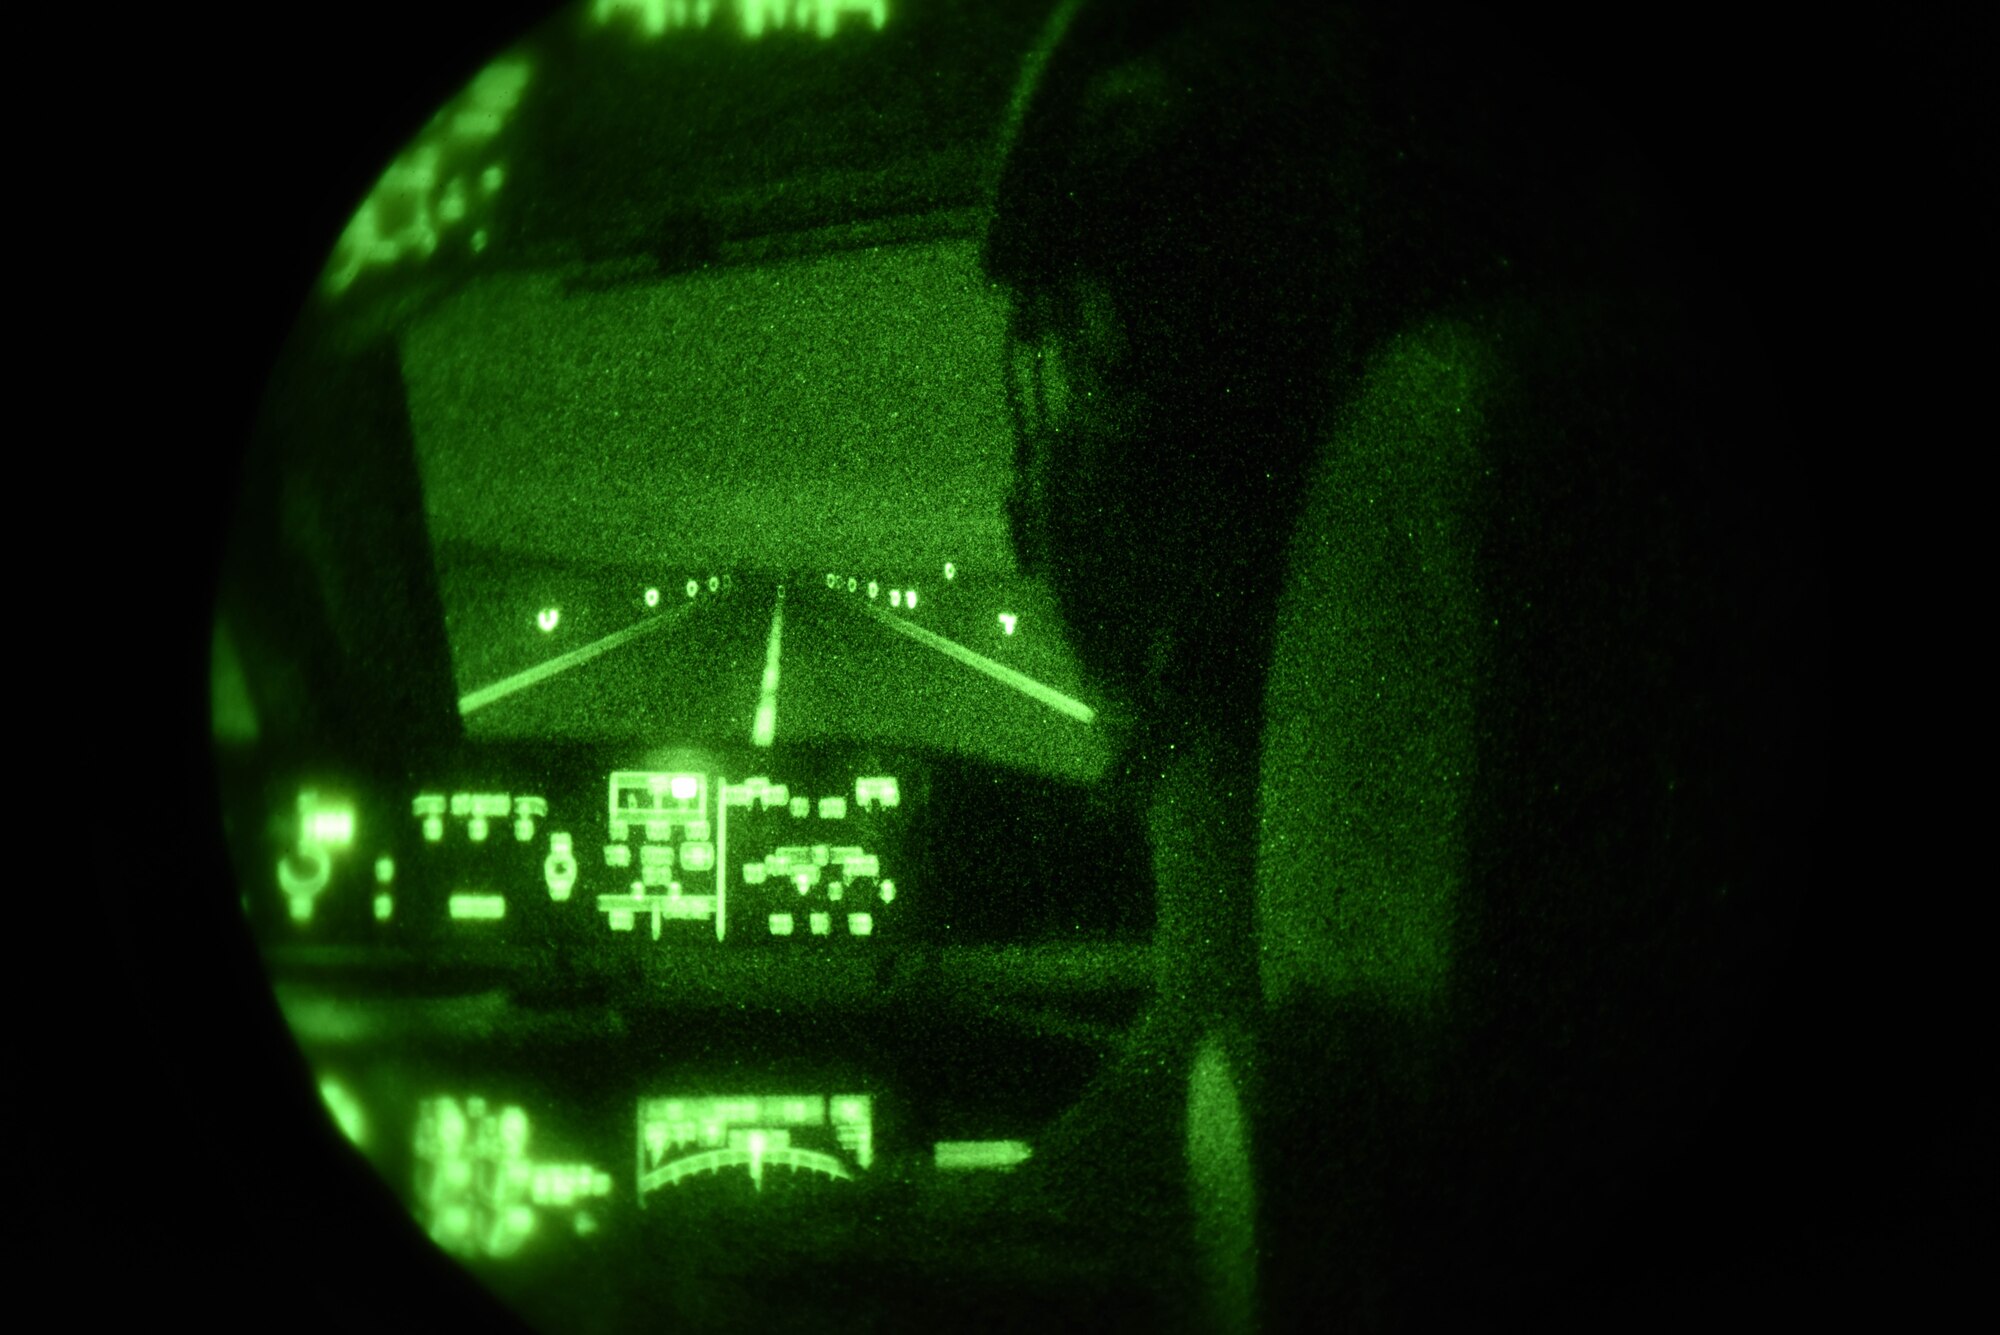 Maj. Jacob Belka, 22nd Operations Group evaluation pilot, approaches a runway for a touch and go flight maneuver April 30, 2020, at North Auxiliary Airfield, South Carolina. Belka performed a total of 17 touch and go’s in the KC-46A Pegasus using night vision goggles. (U.S. Air Force photo by Airman 1st Class Marc A. Garcia)